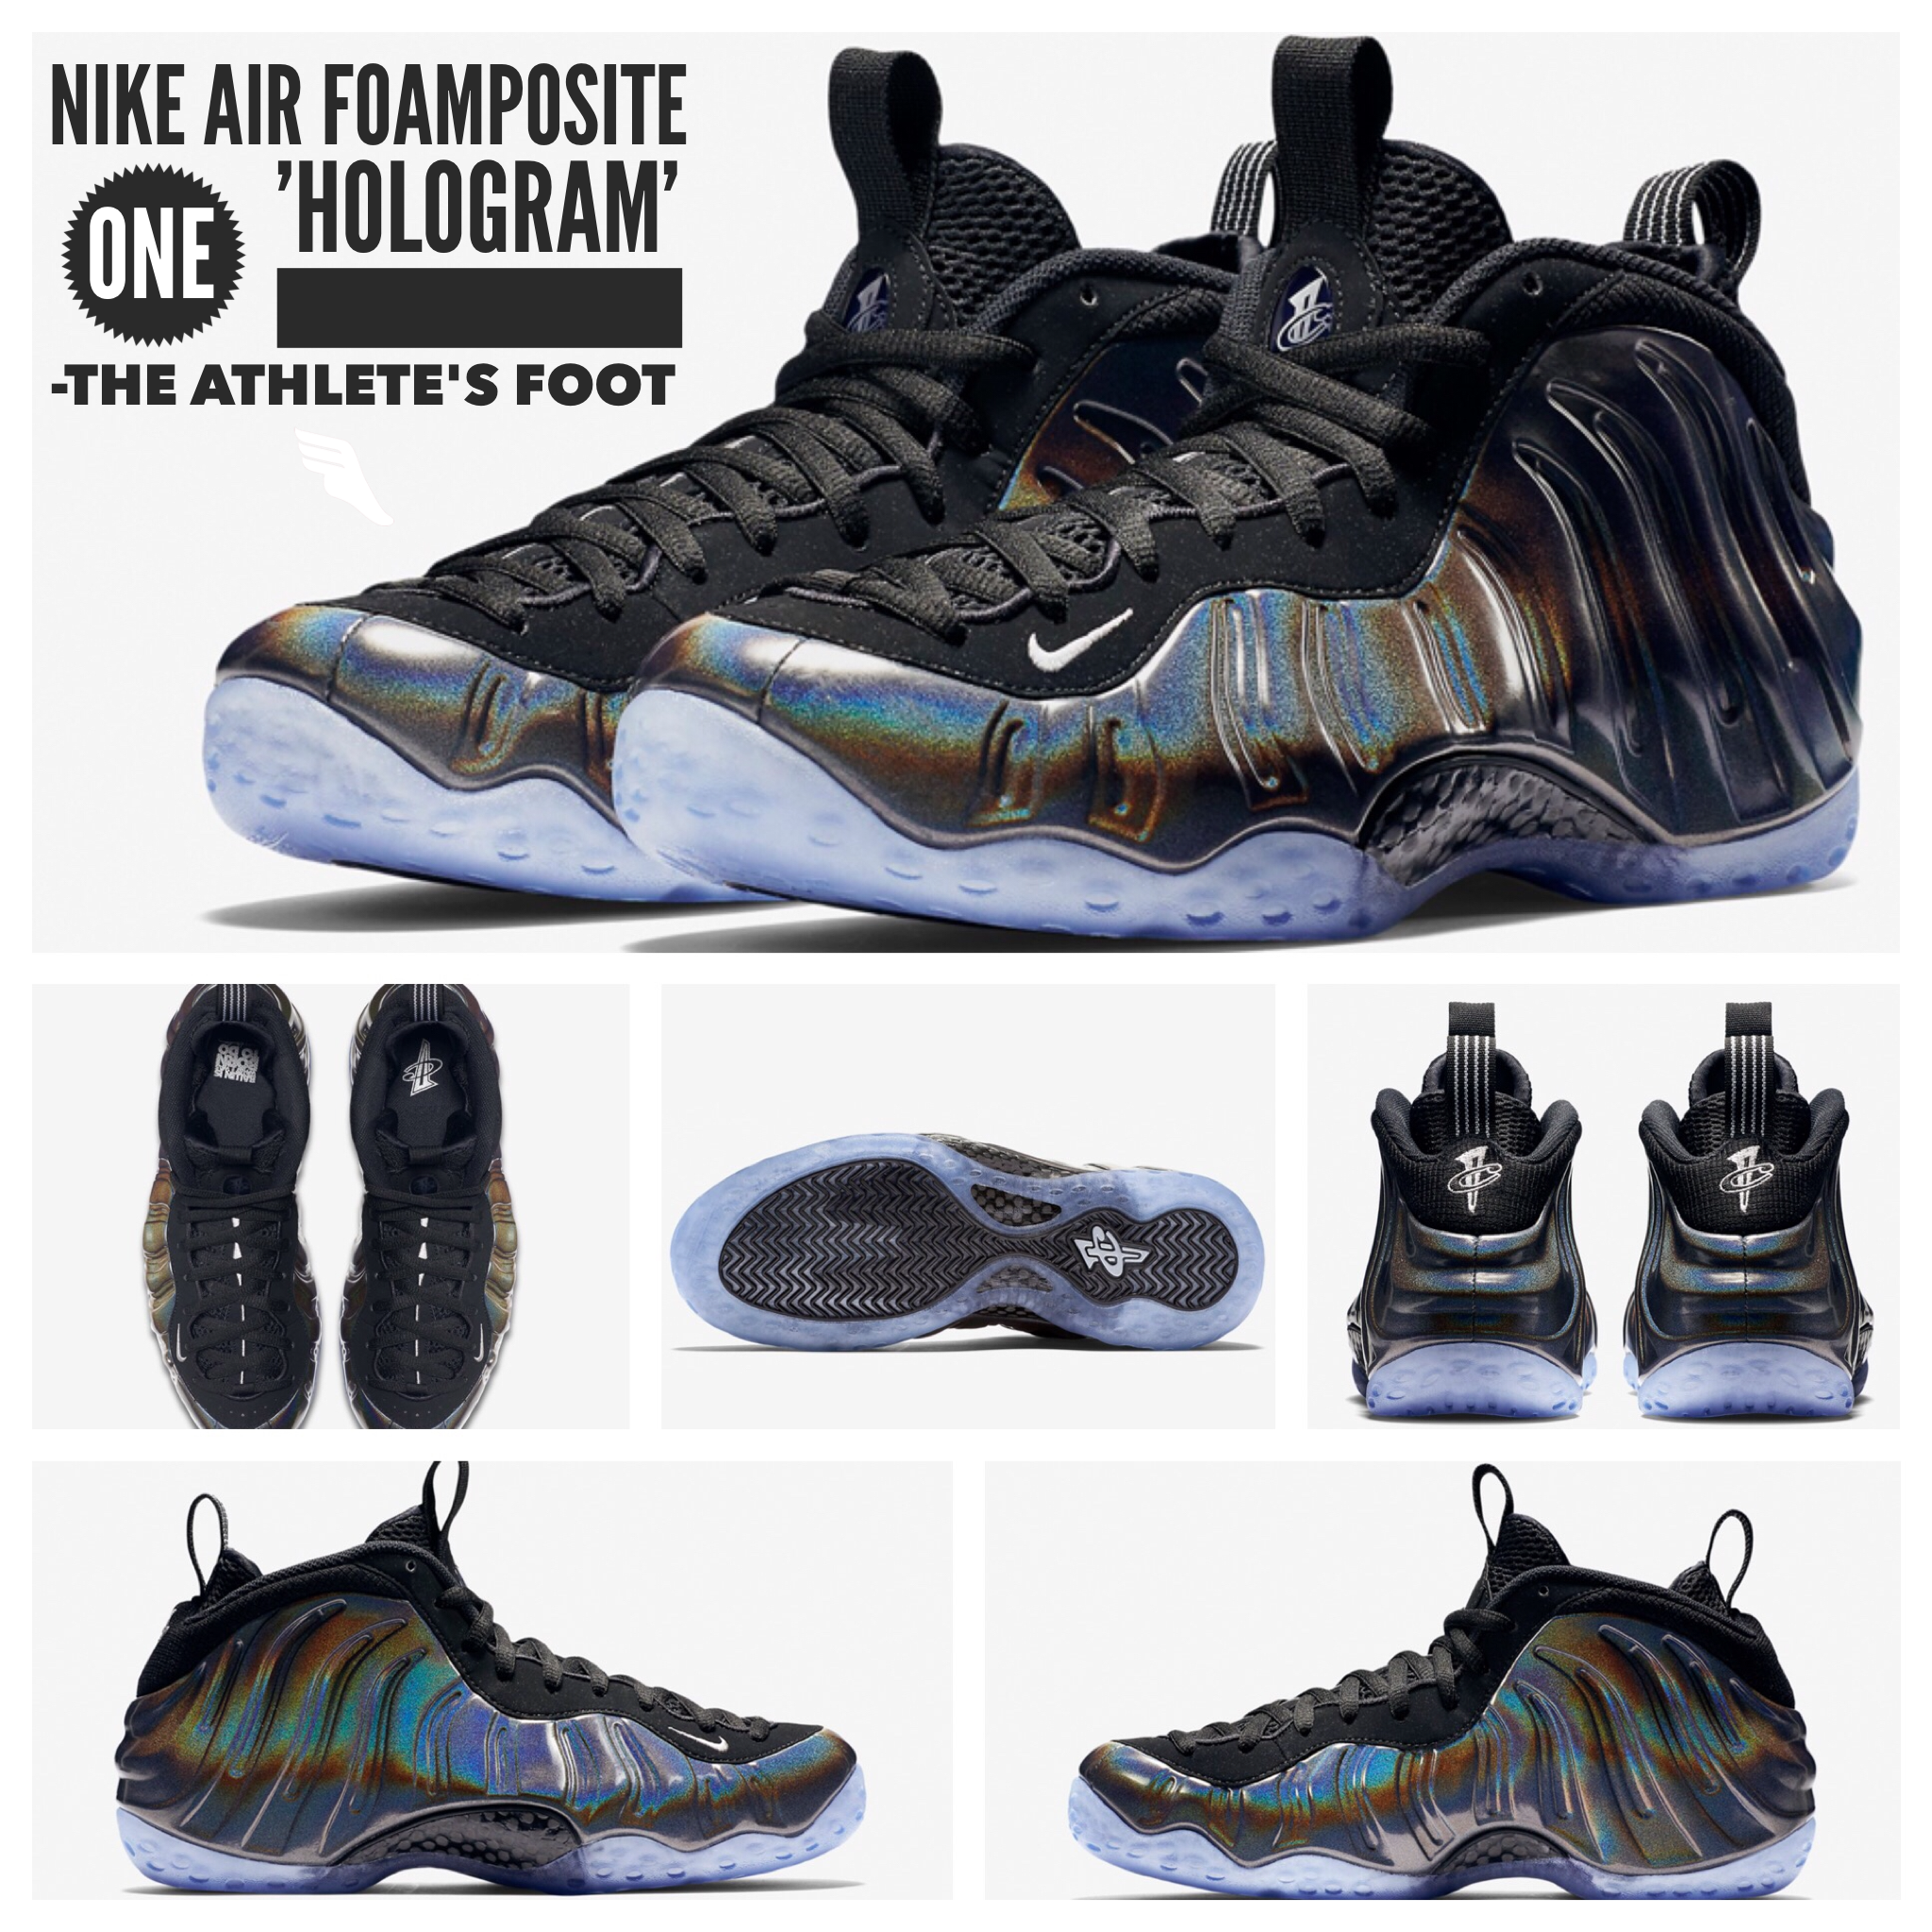 Nike Air Foamposite One Hologram l The 